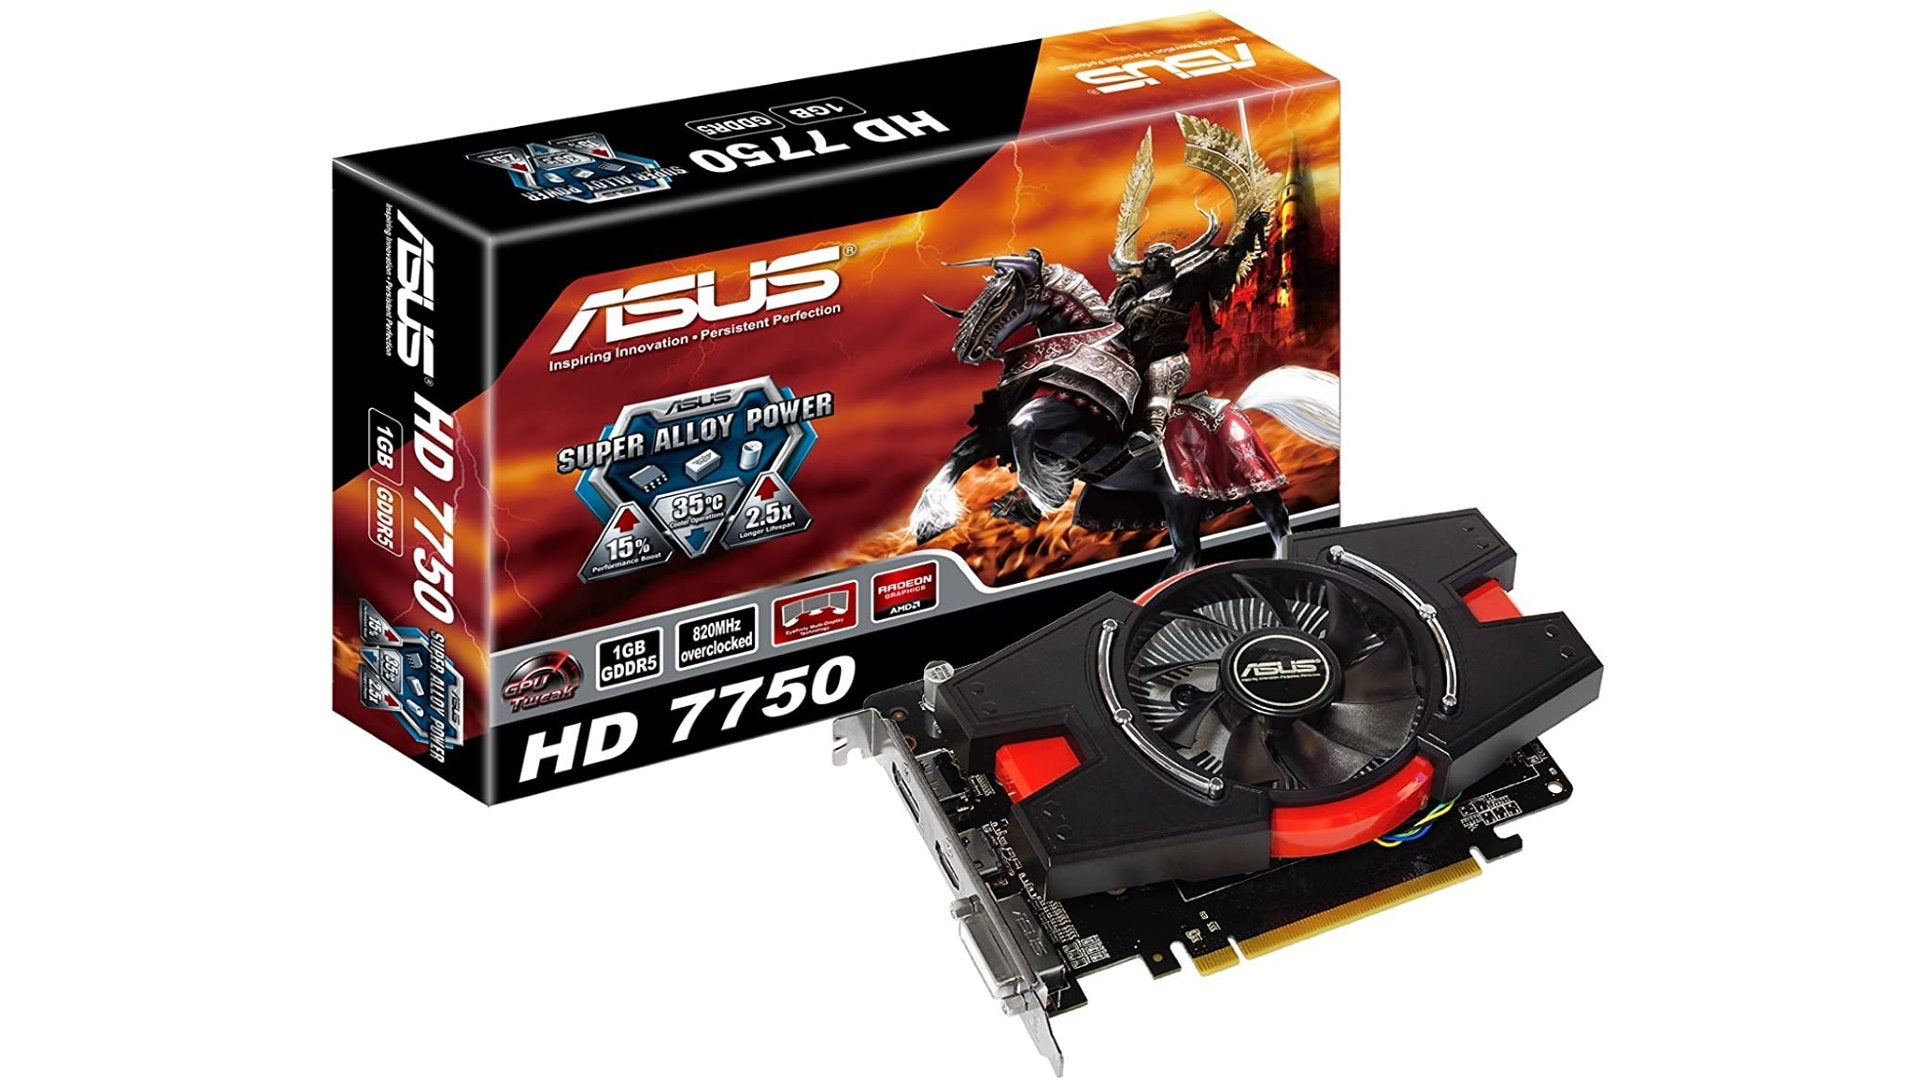 A graphics card box for Asus' Radeon HD 7750, depicting a samurai on a horse